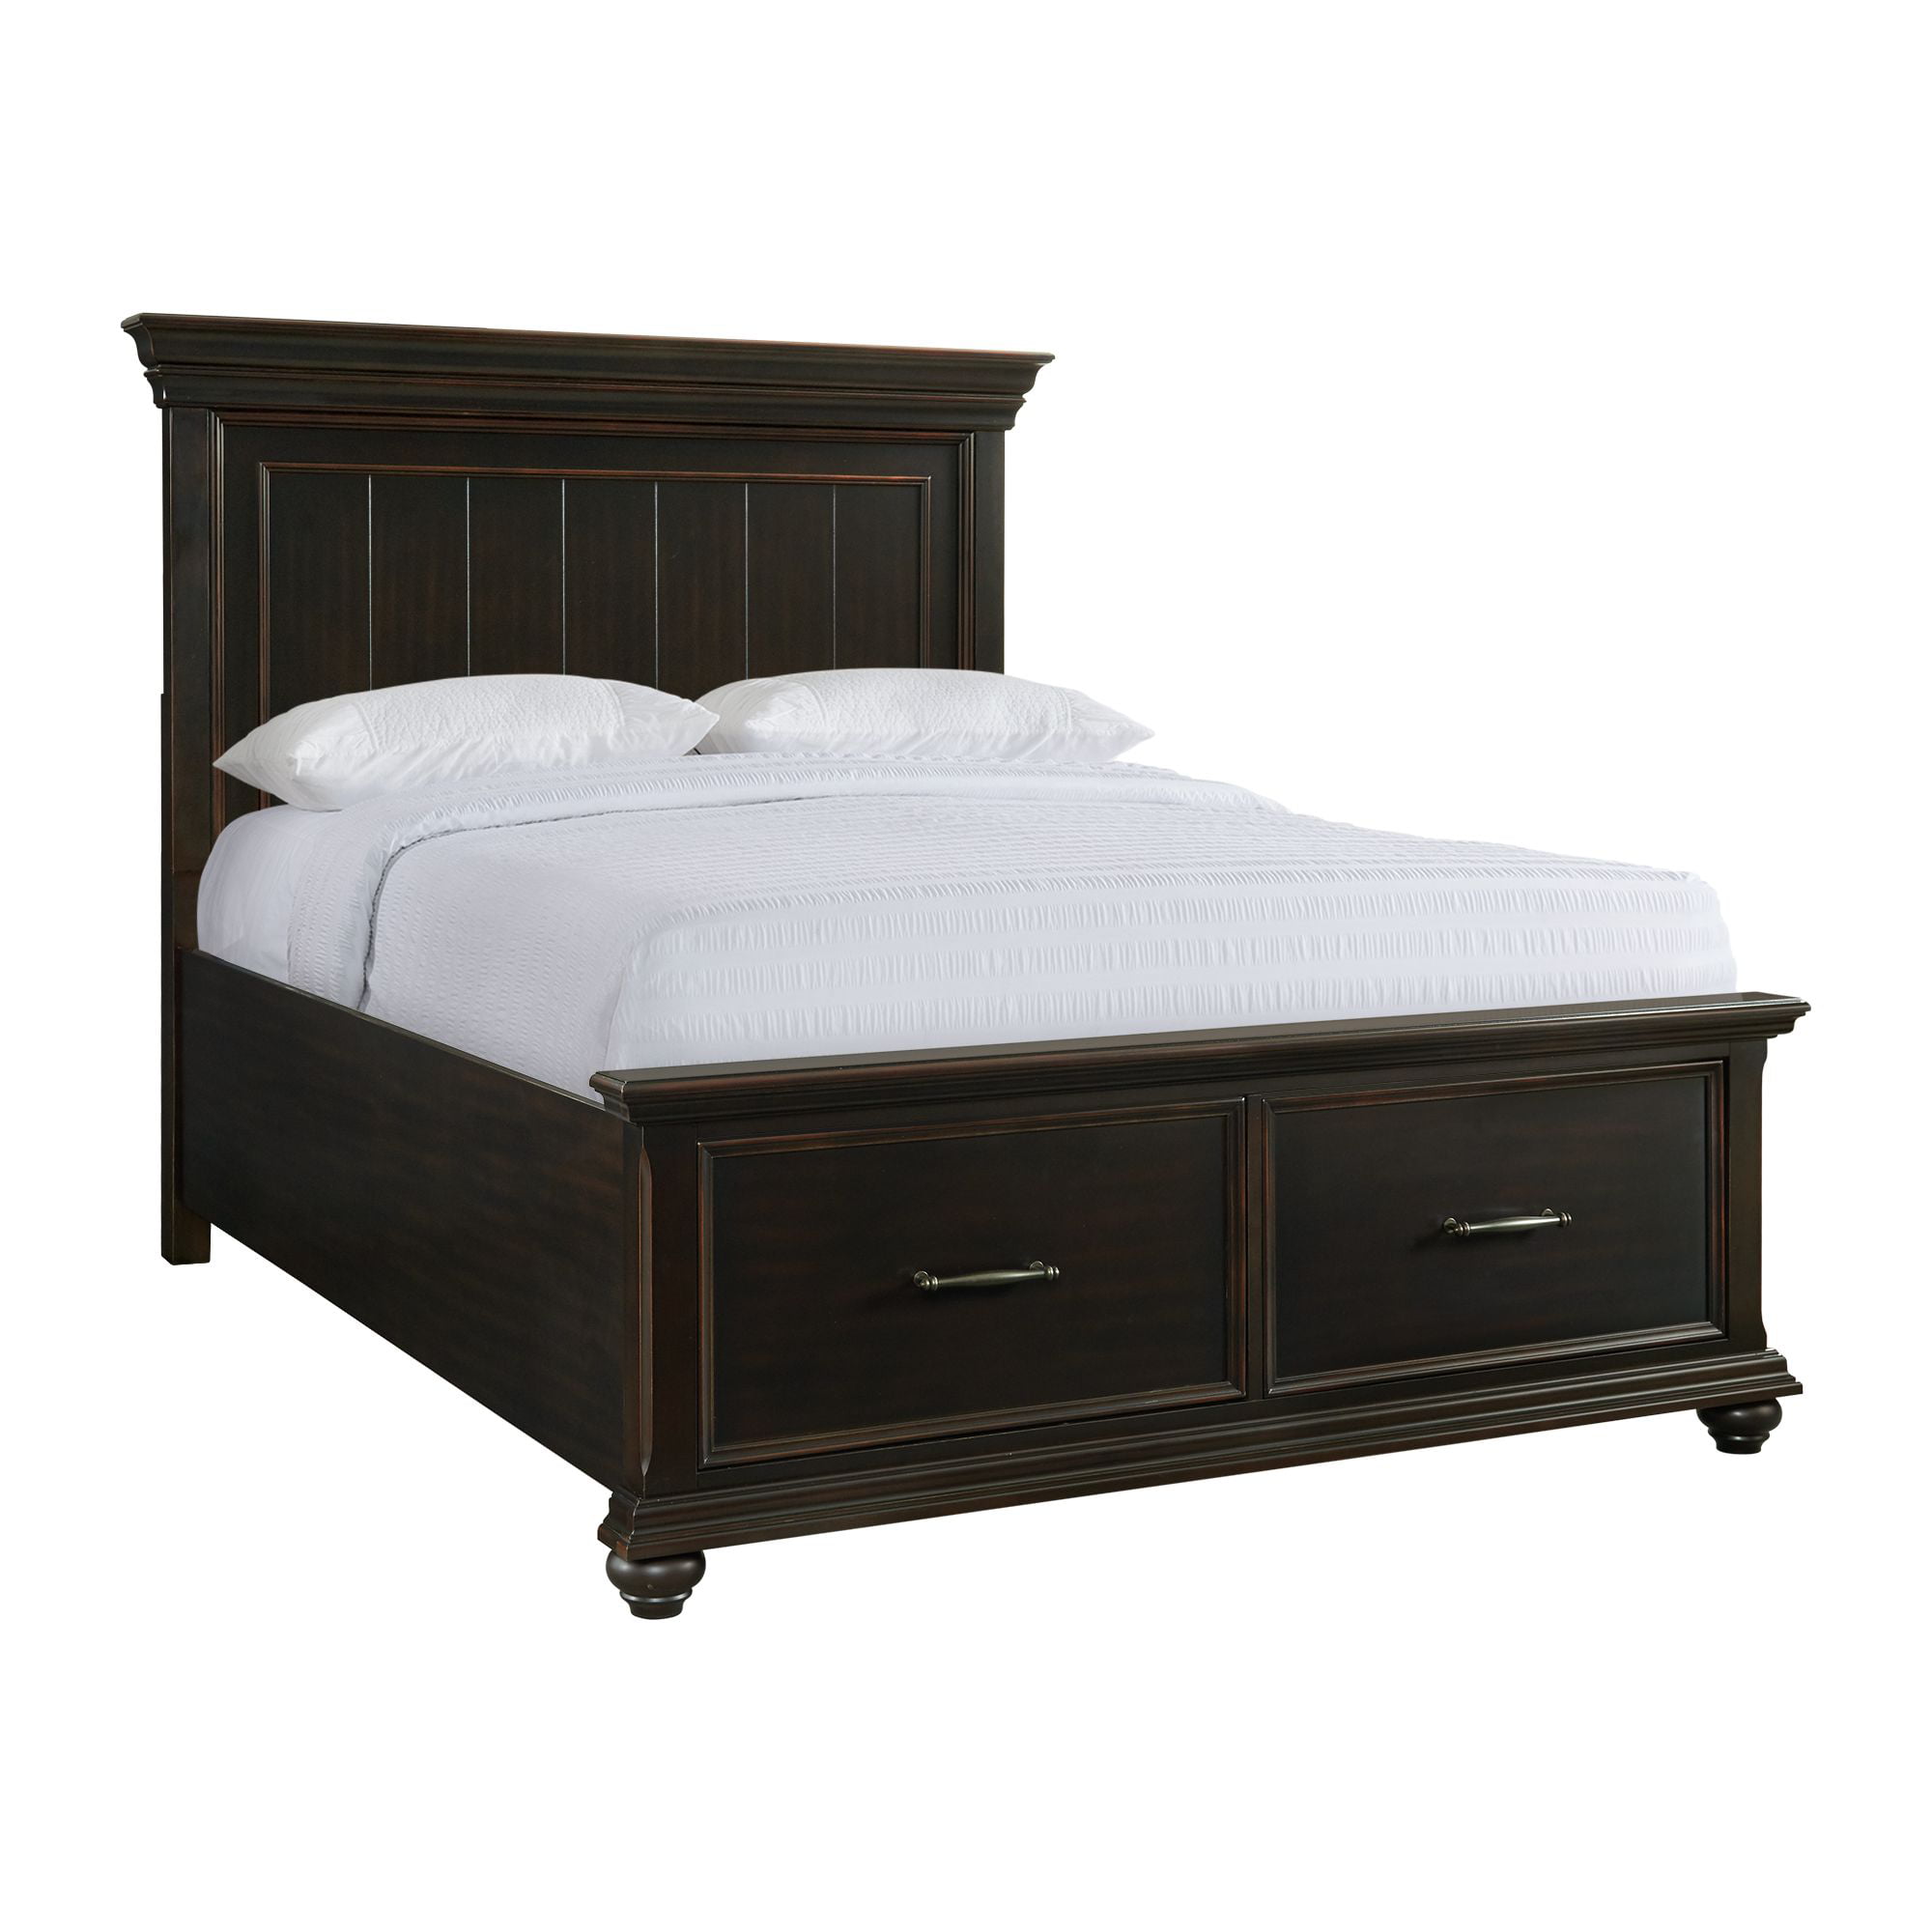 Eastern King Bookcase Bed With Underbed, Hillary Eastern King Bookcase Bedroom Design